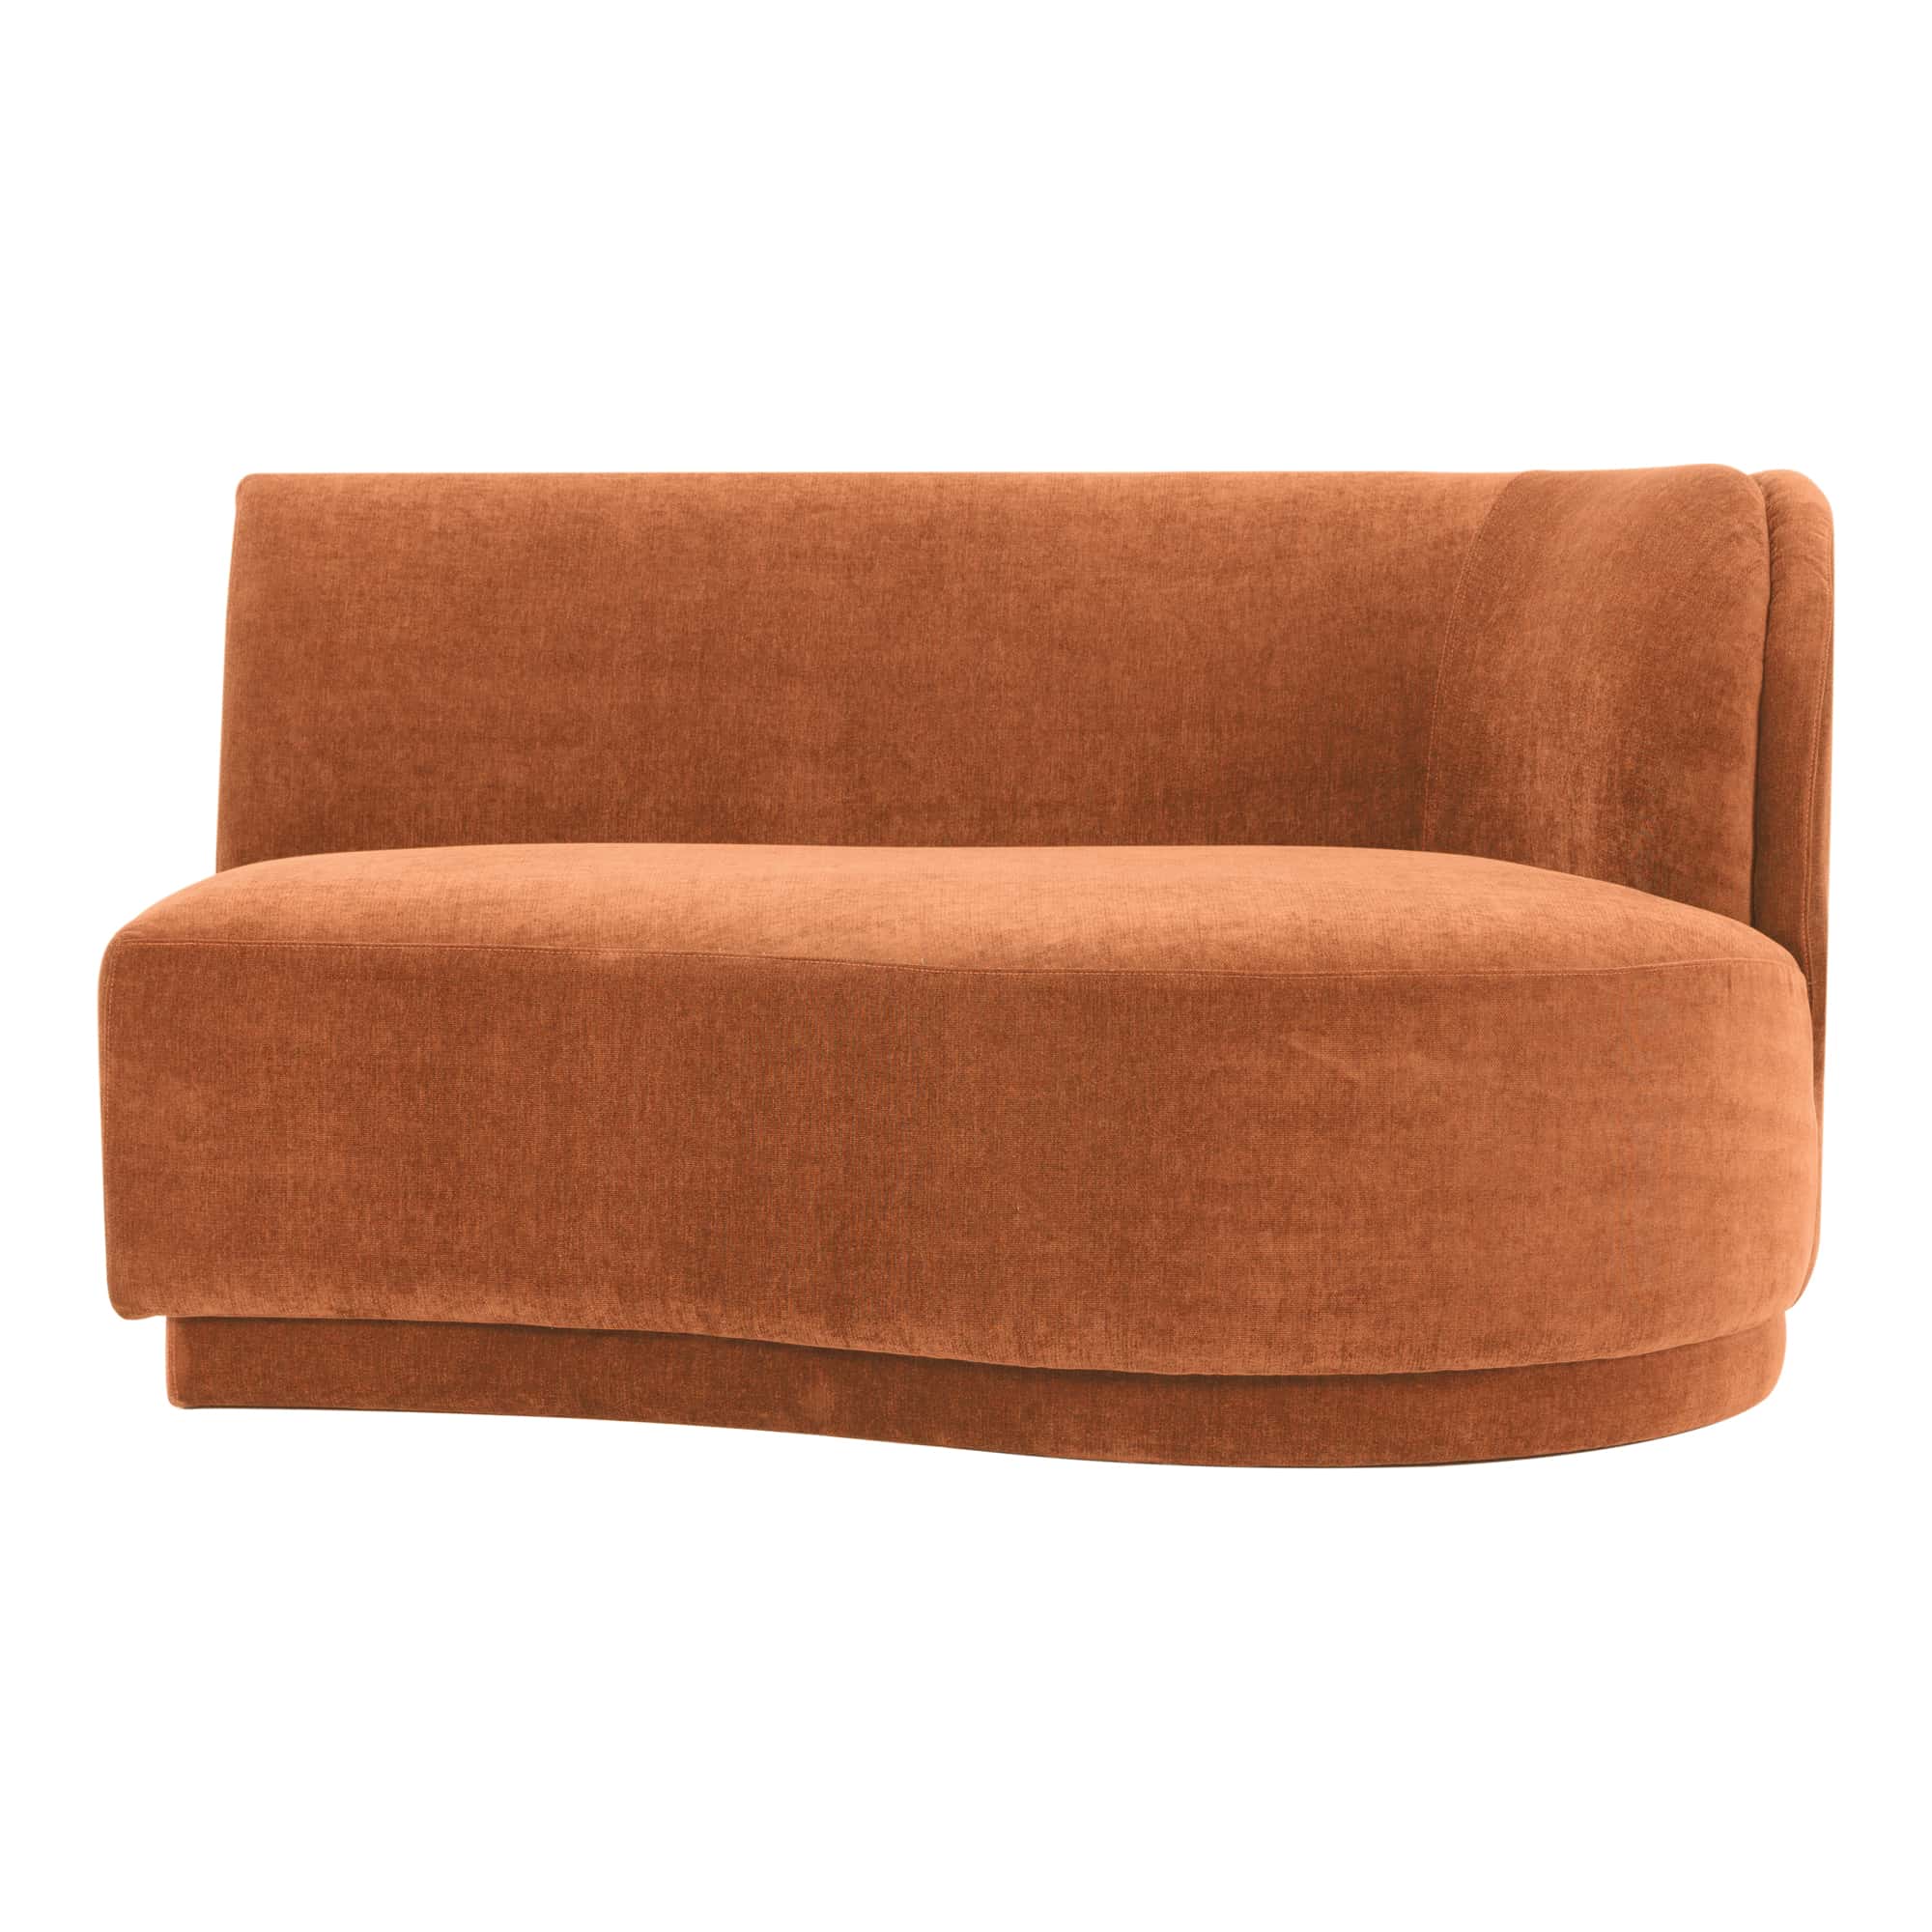 Yoon 2 Seat Chaise Right Rust by Moe's Home Collection